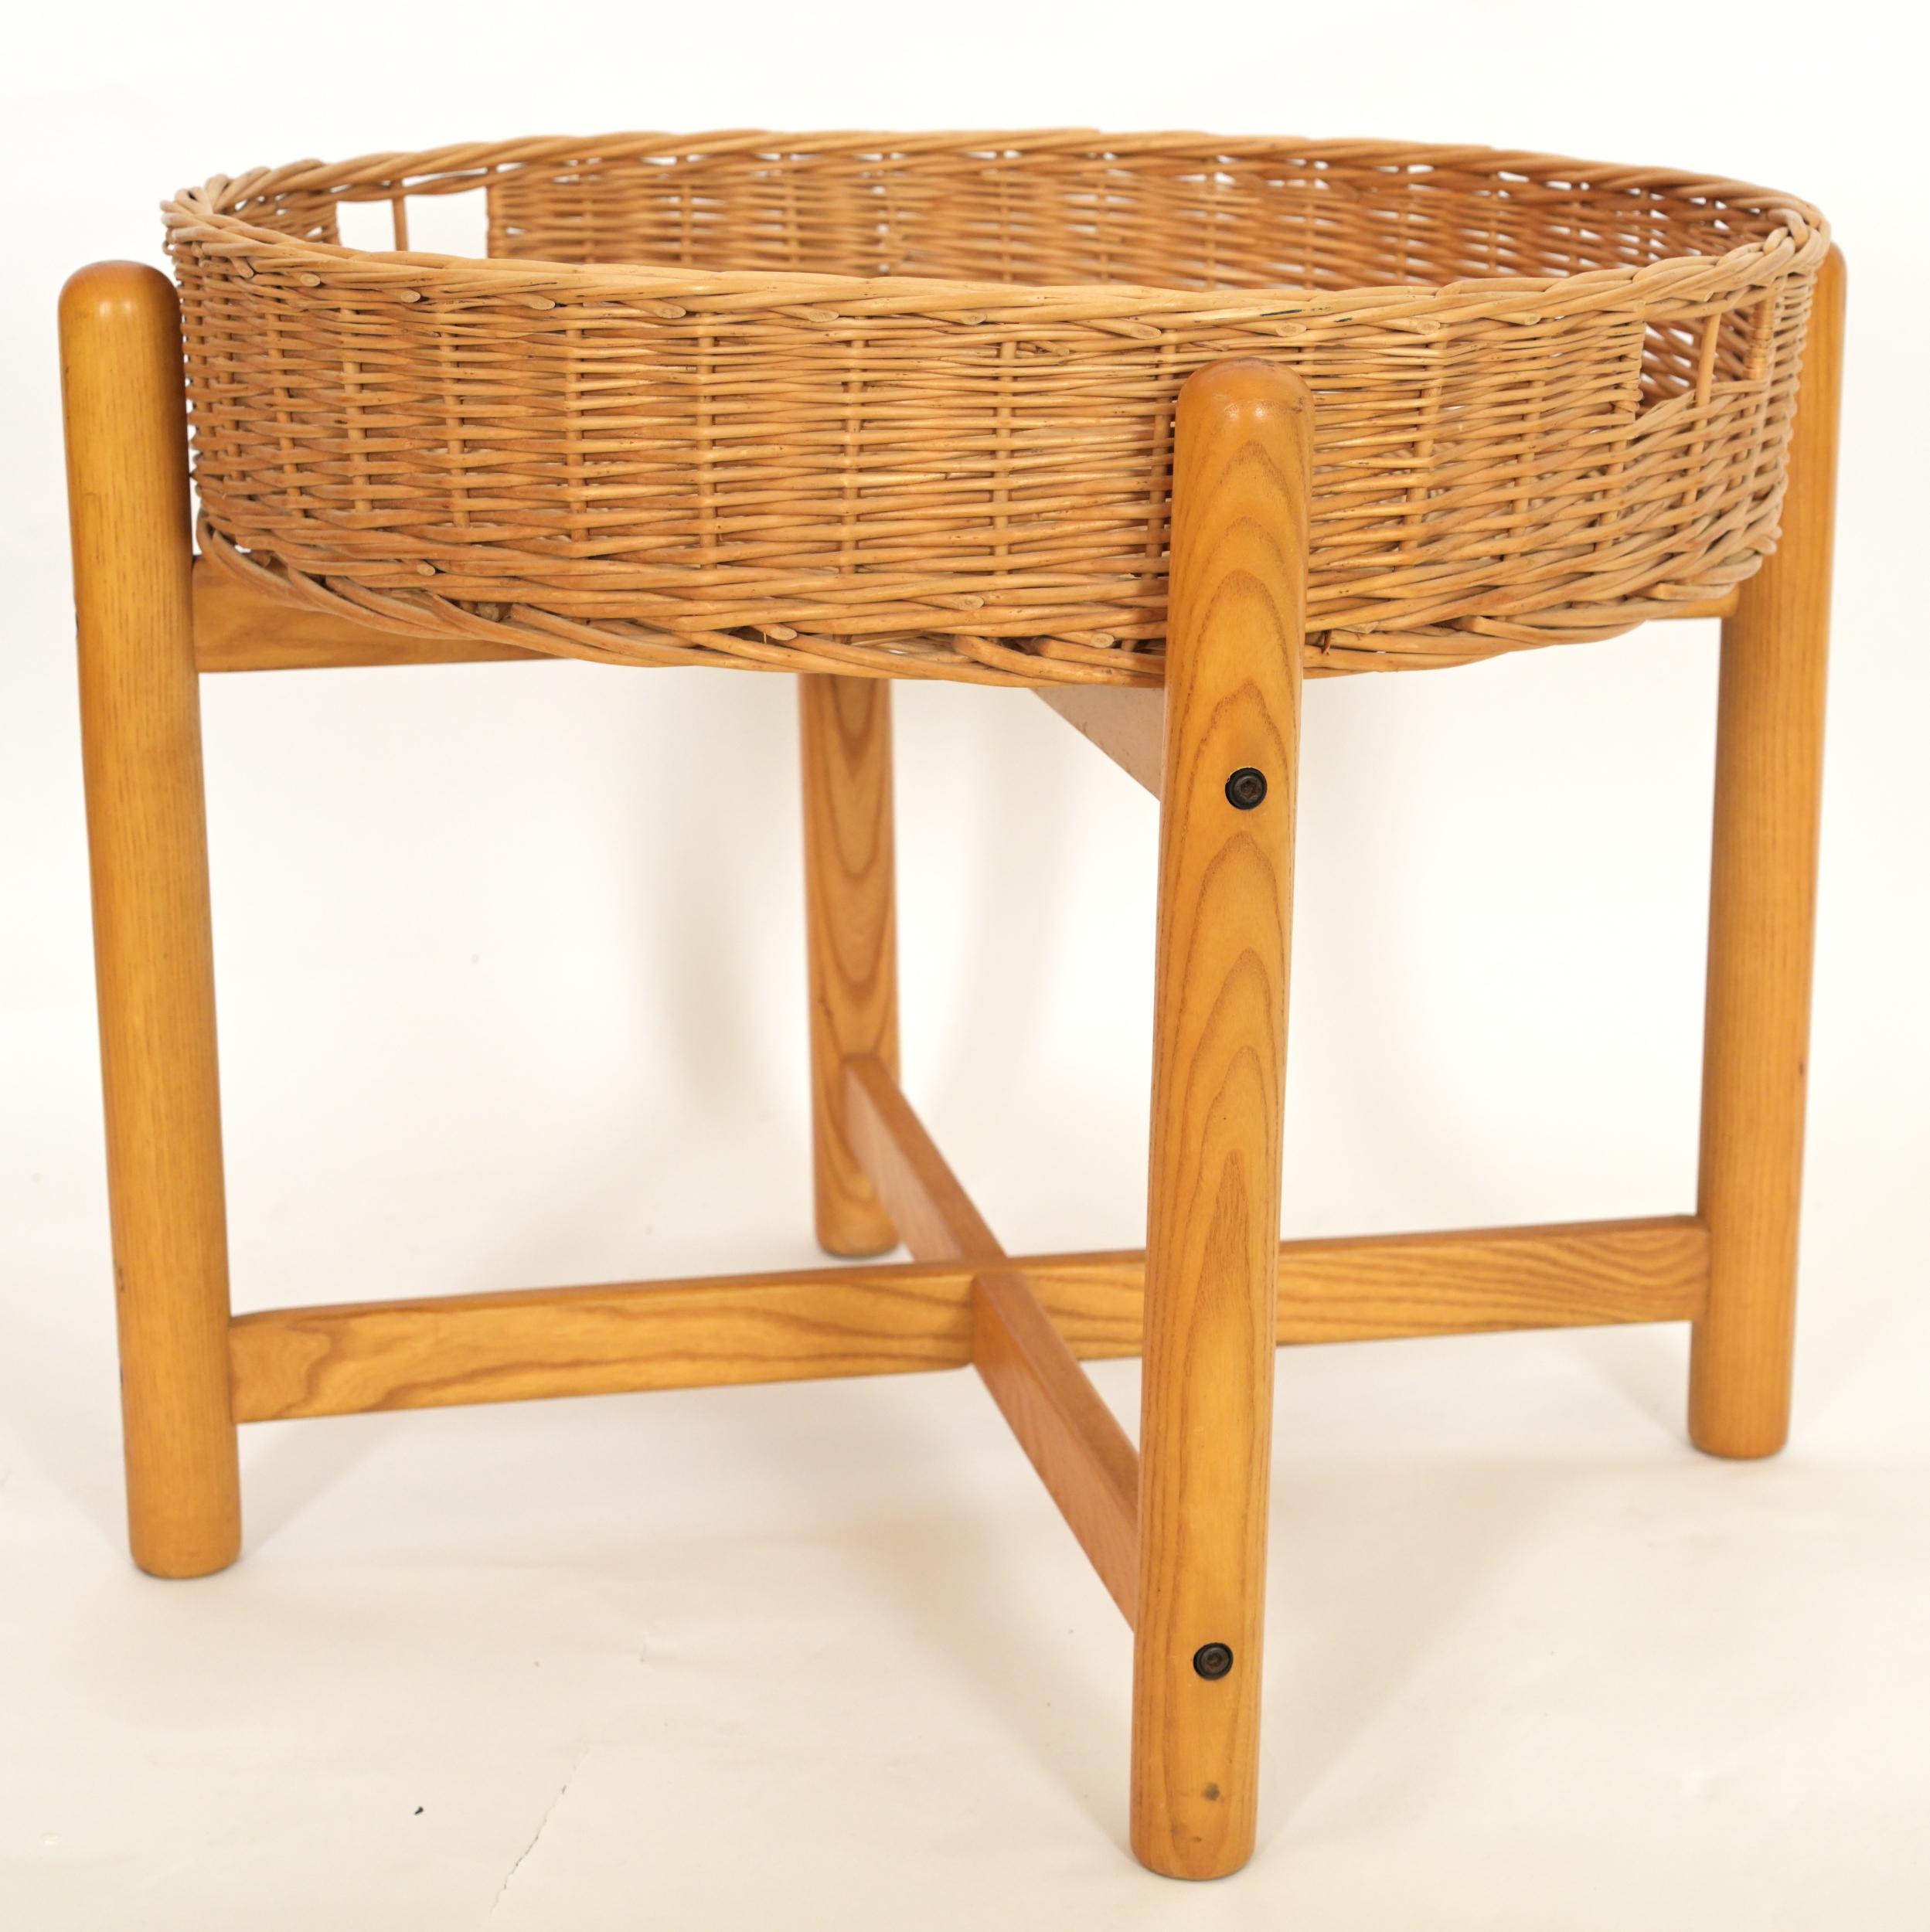 A wicker basket side table having a removable wicker top upon a cross section four leg oak base. Circa 1970.

